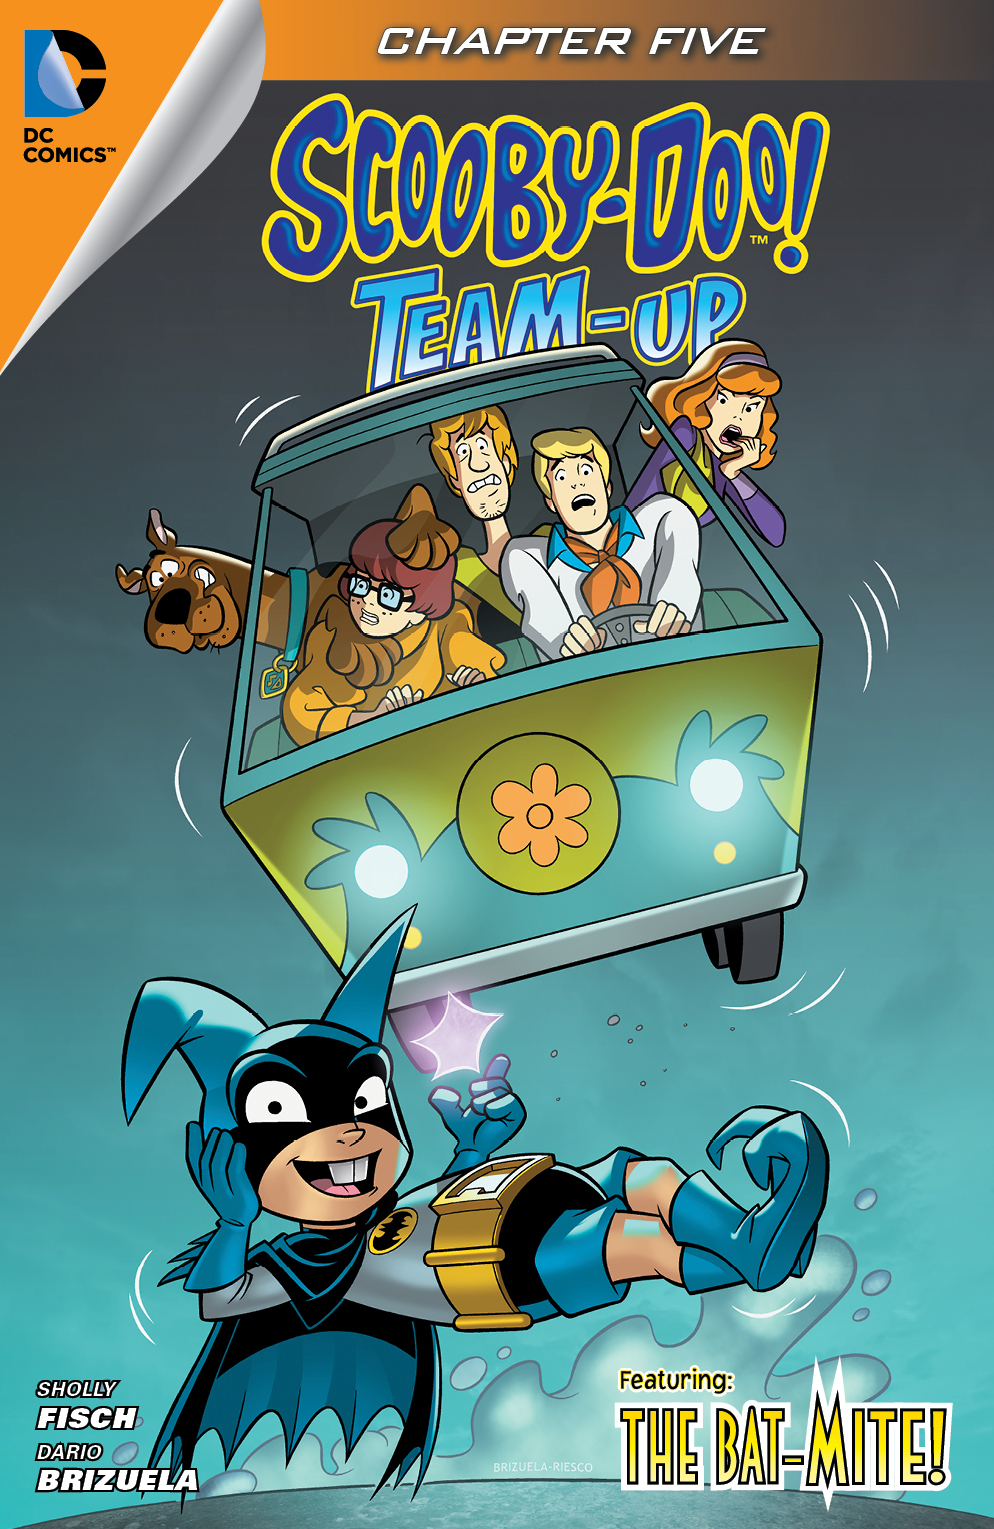 Scooby-Doo Team-Up #5 preview images